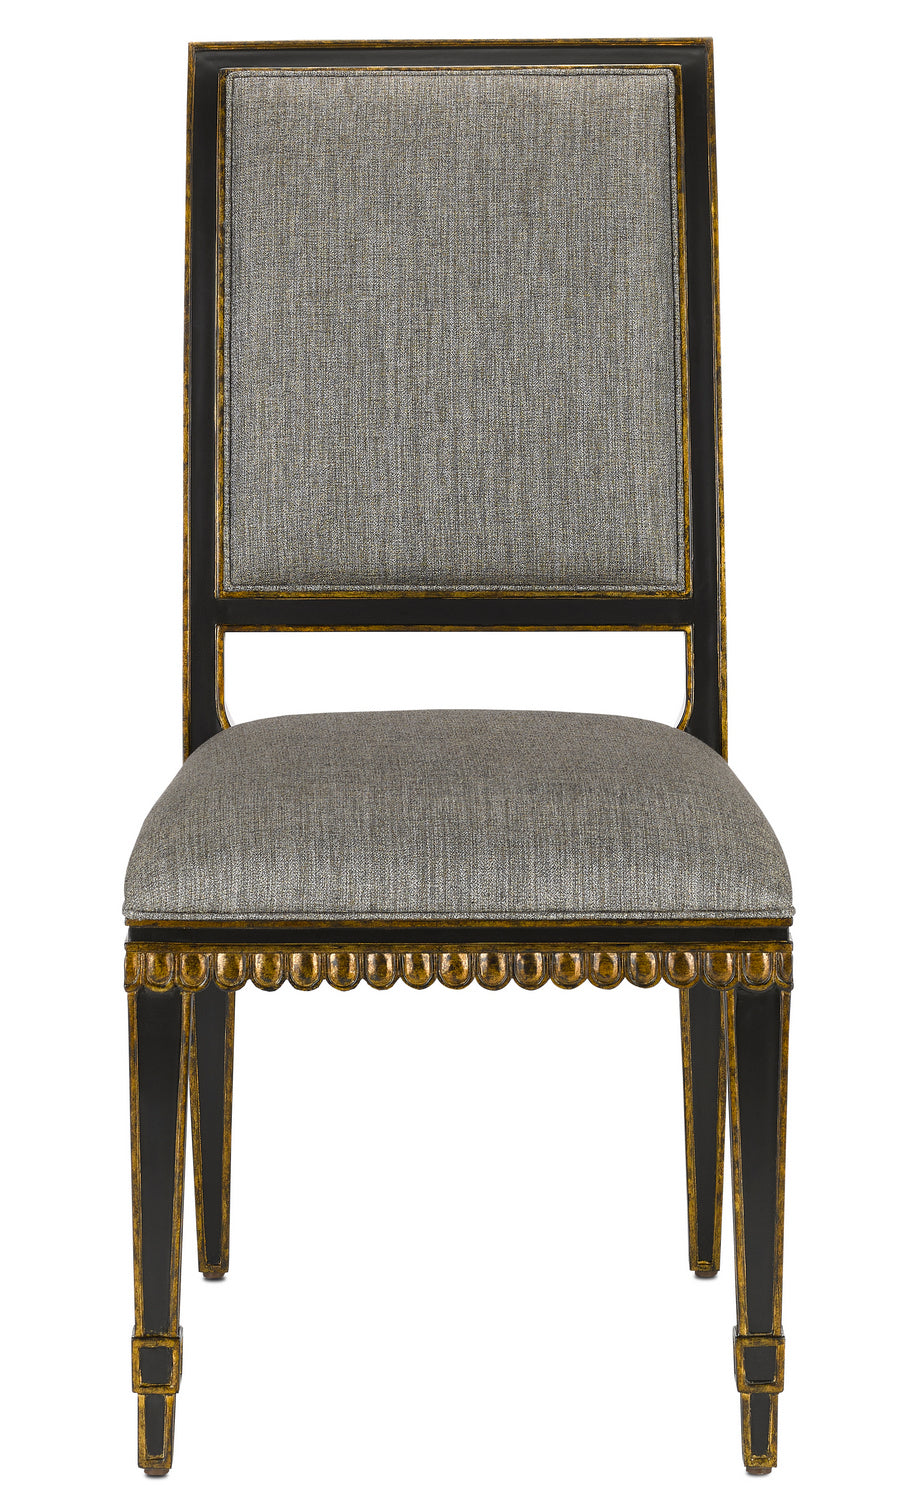 Chair from the Ines collection in Caviar Black/Antique Gold finish